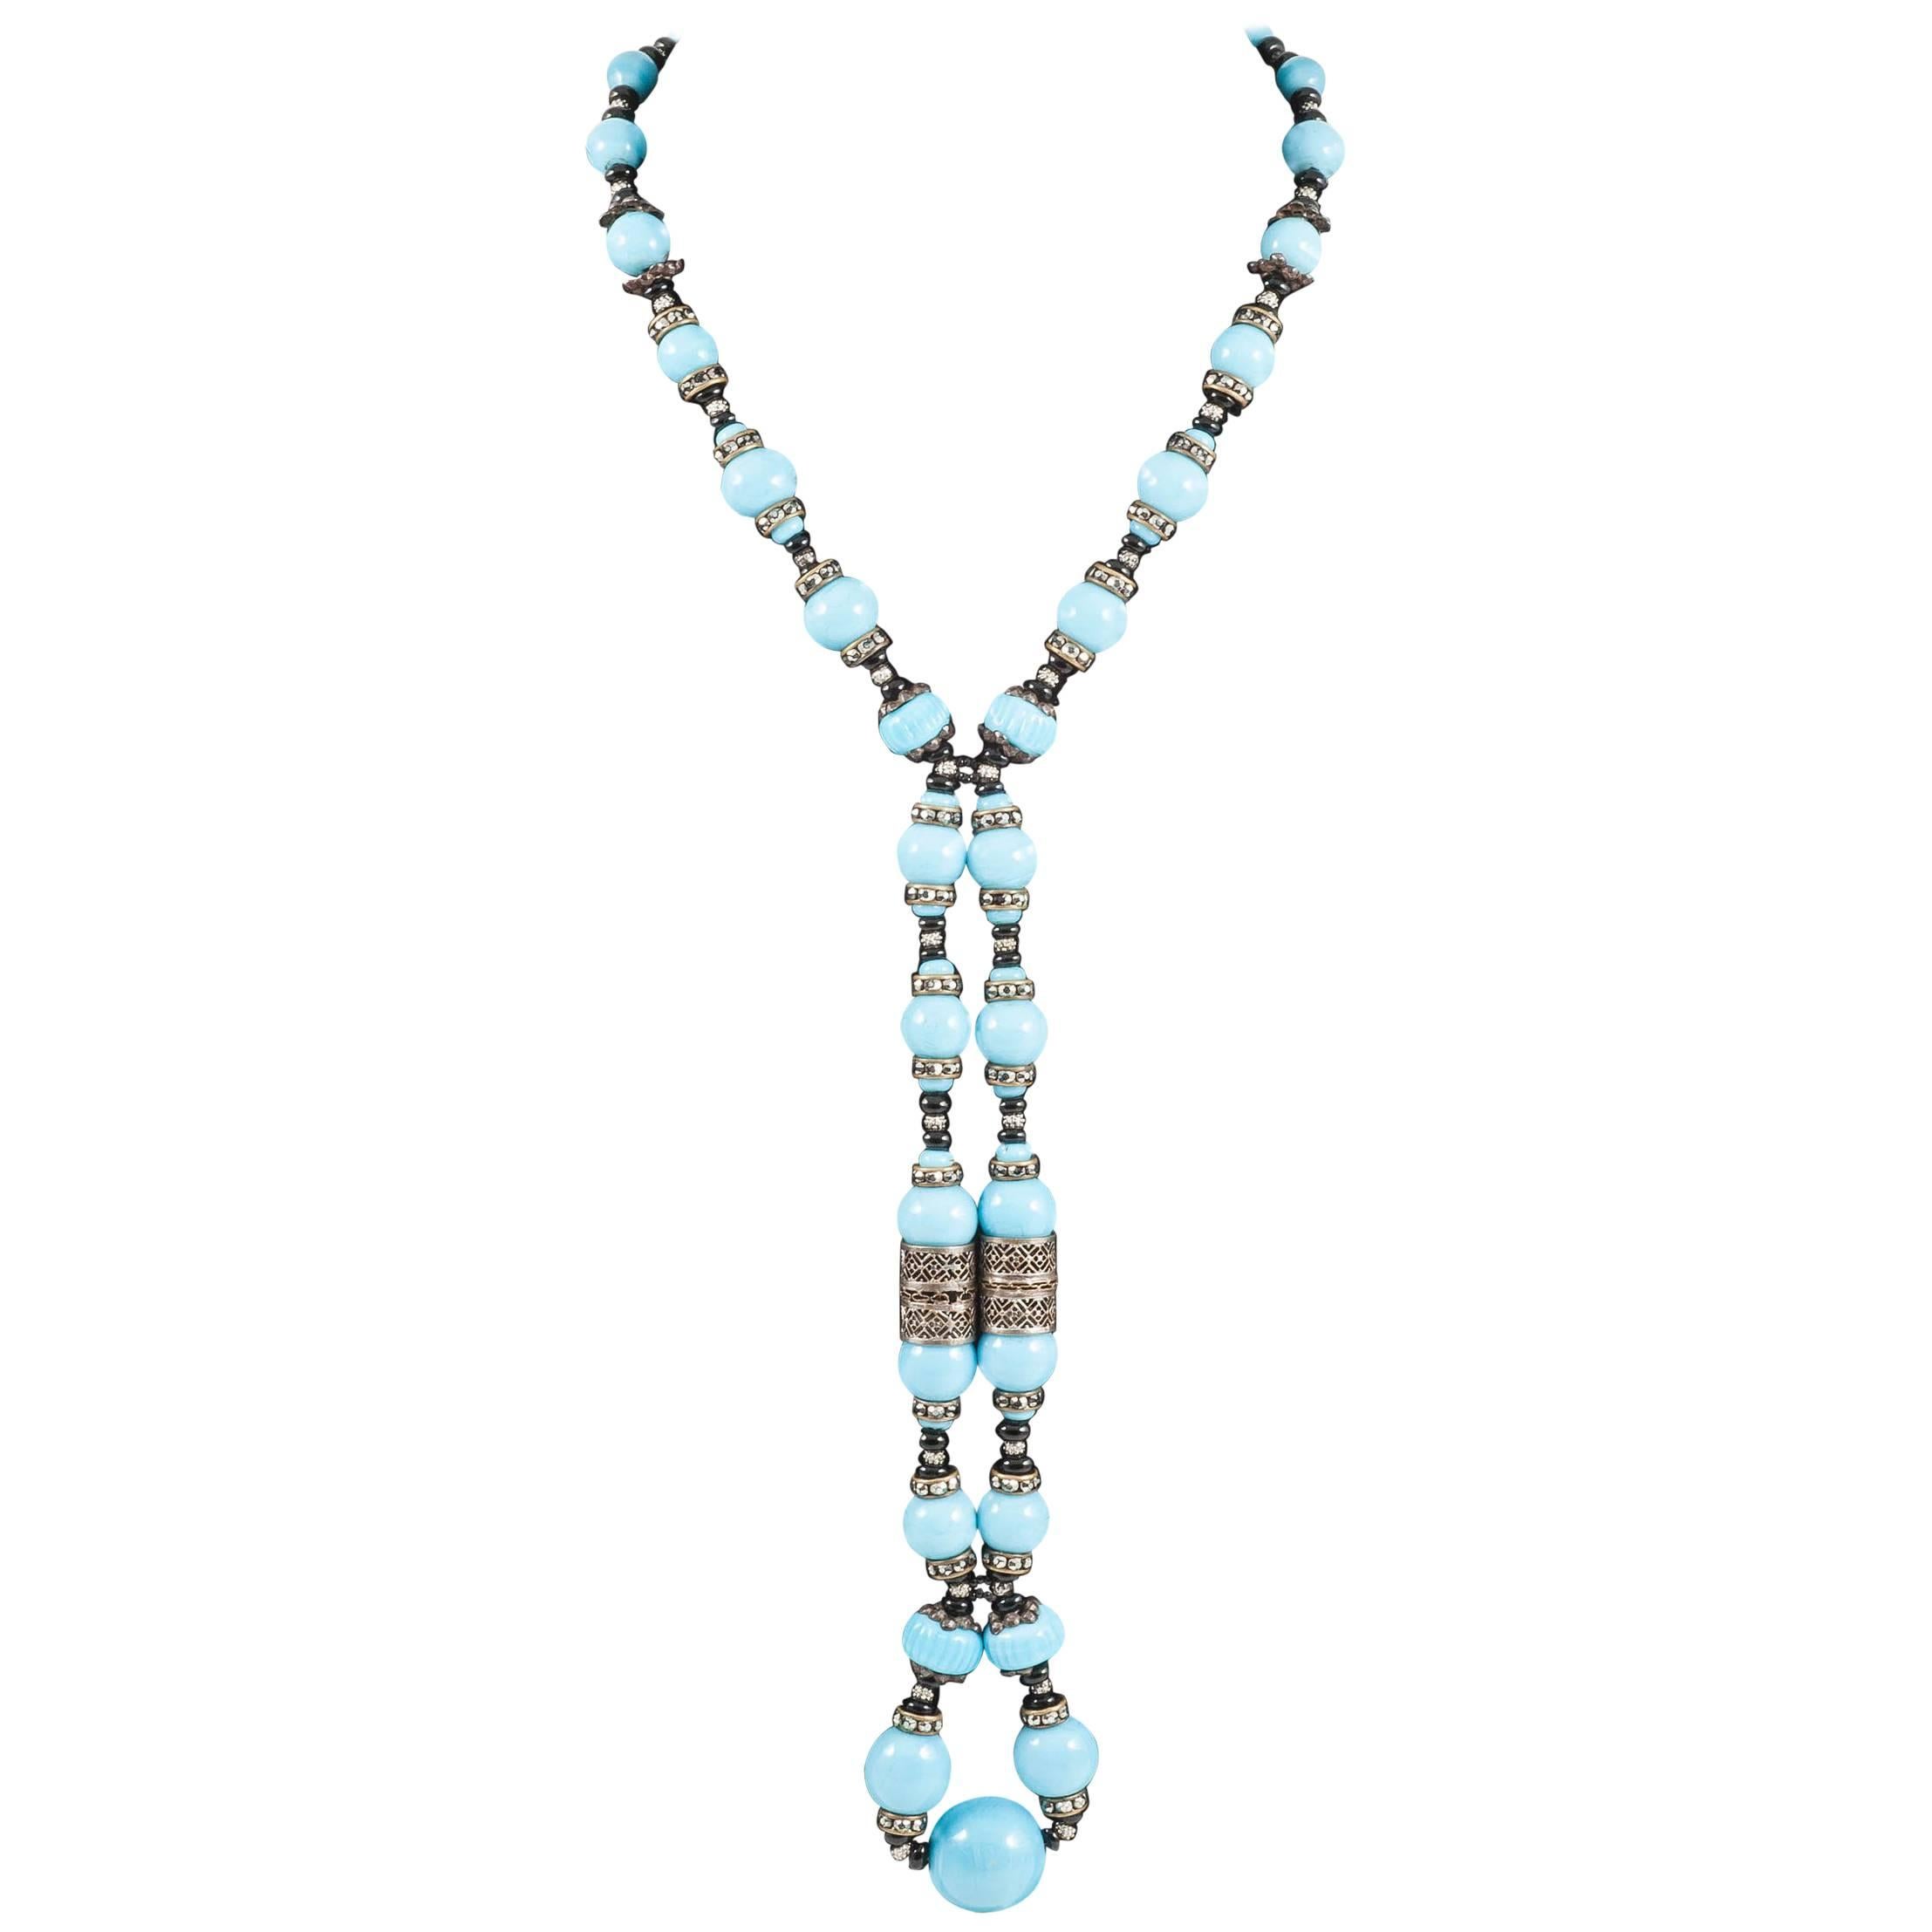 Stunning turquoise and black glass sautoir necklace, French, 1920s